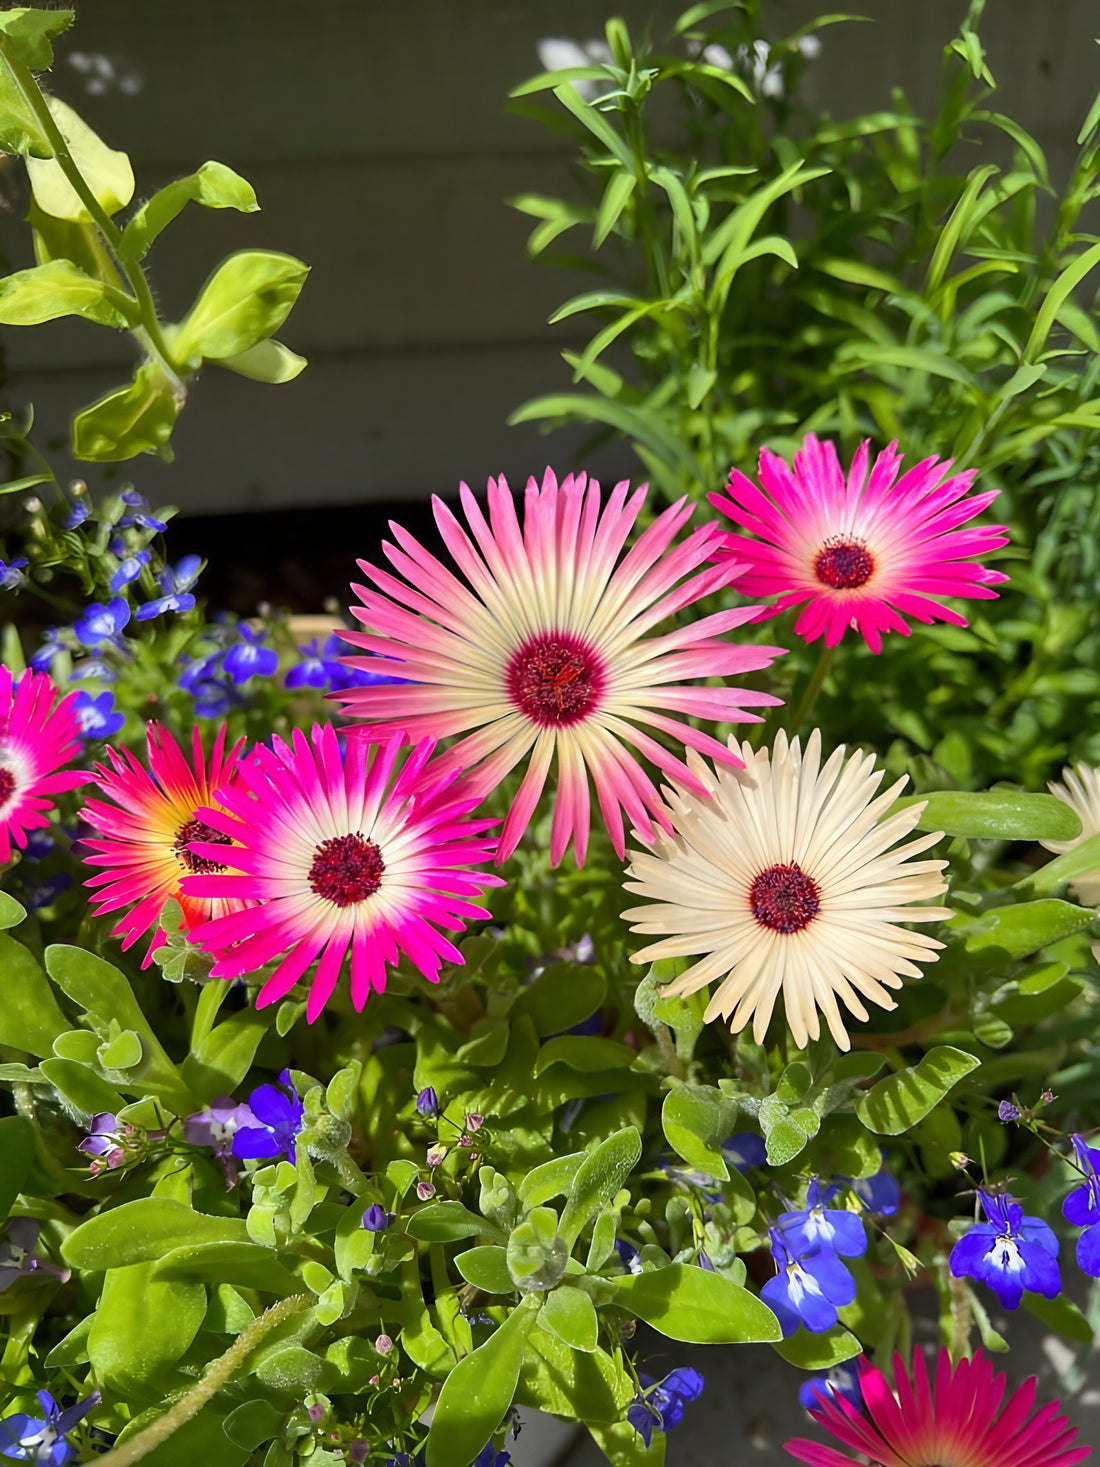 Cluster of Mesembryanthemum Harlequin flowers with pink and white petals